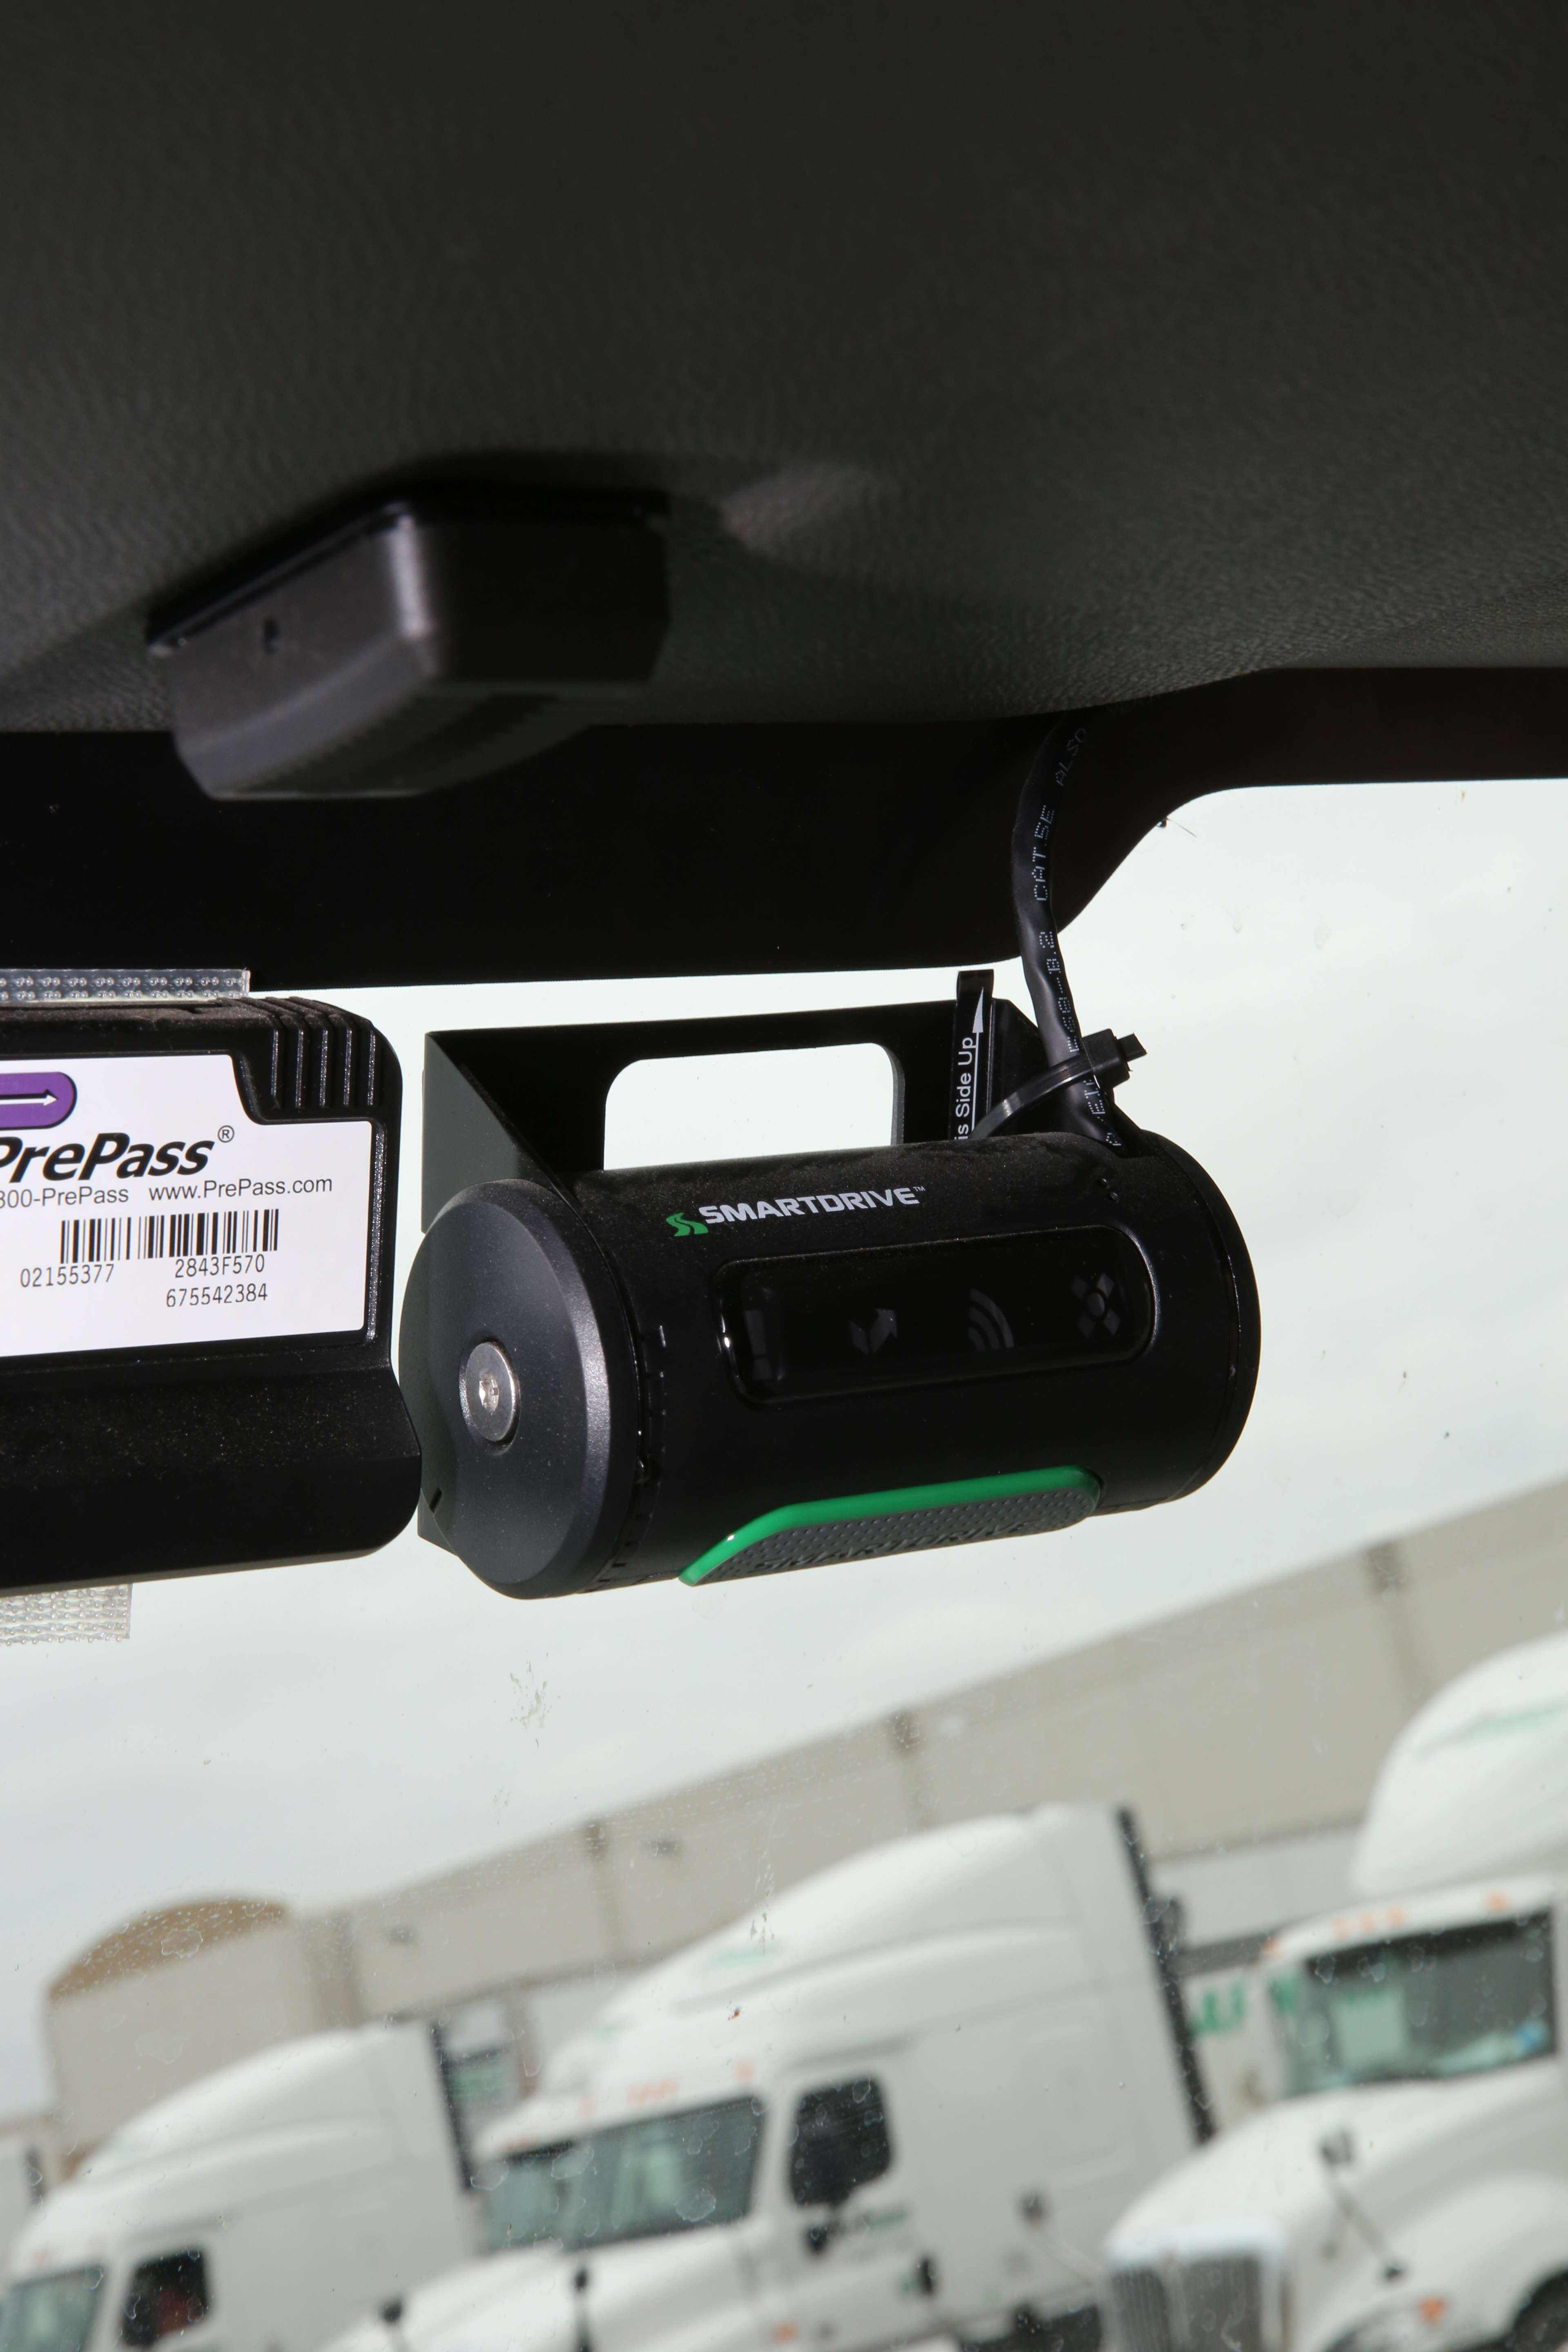 PrePass and Smartdrive device in cab of truck